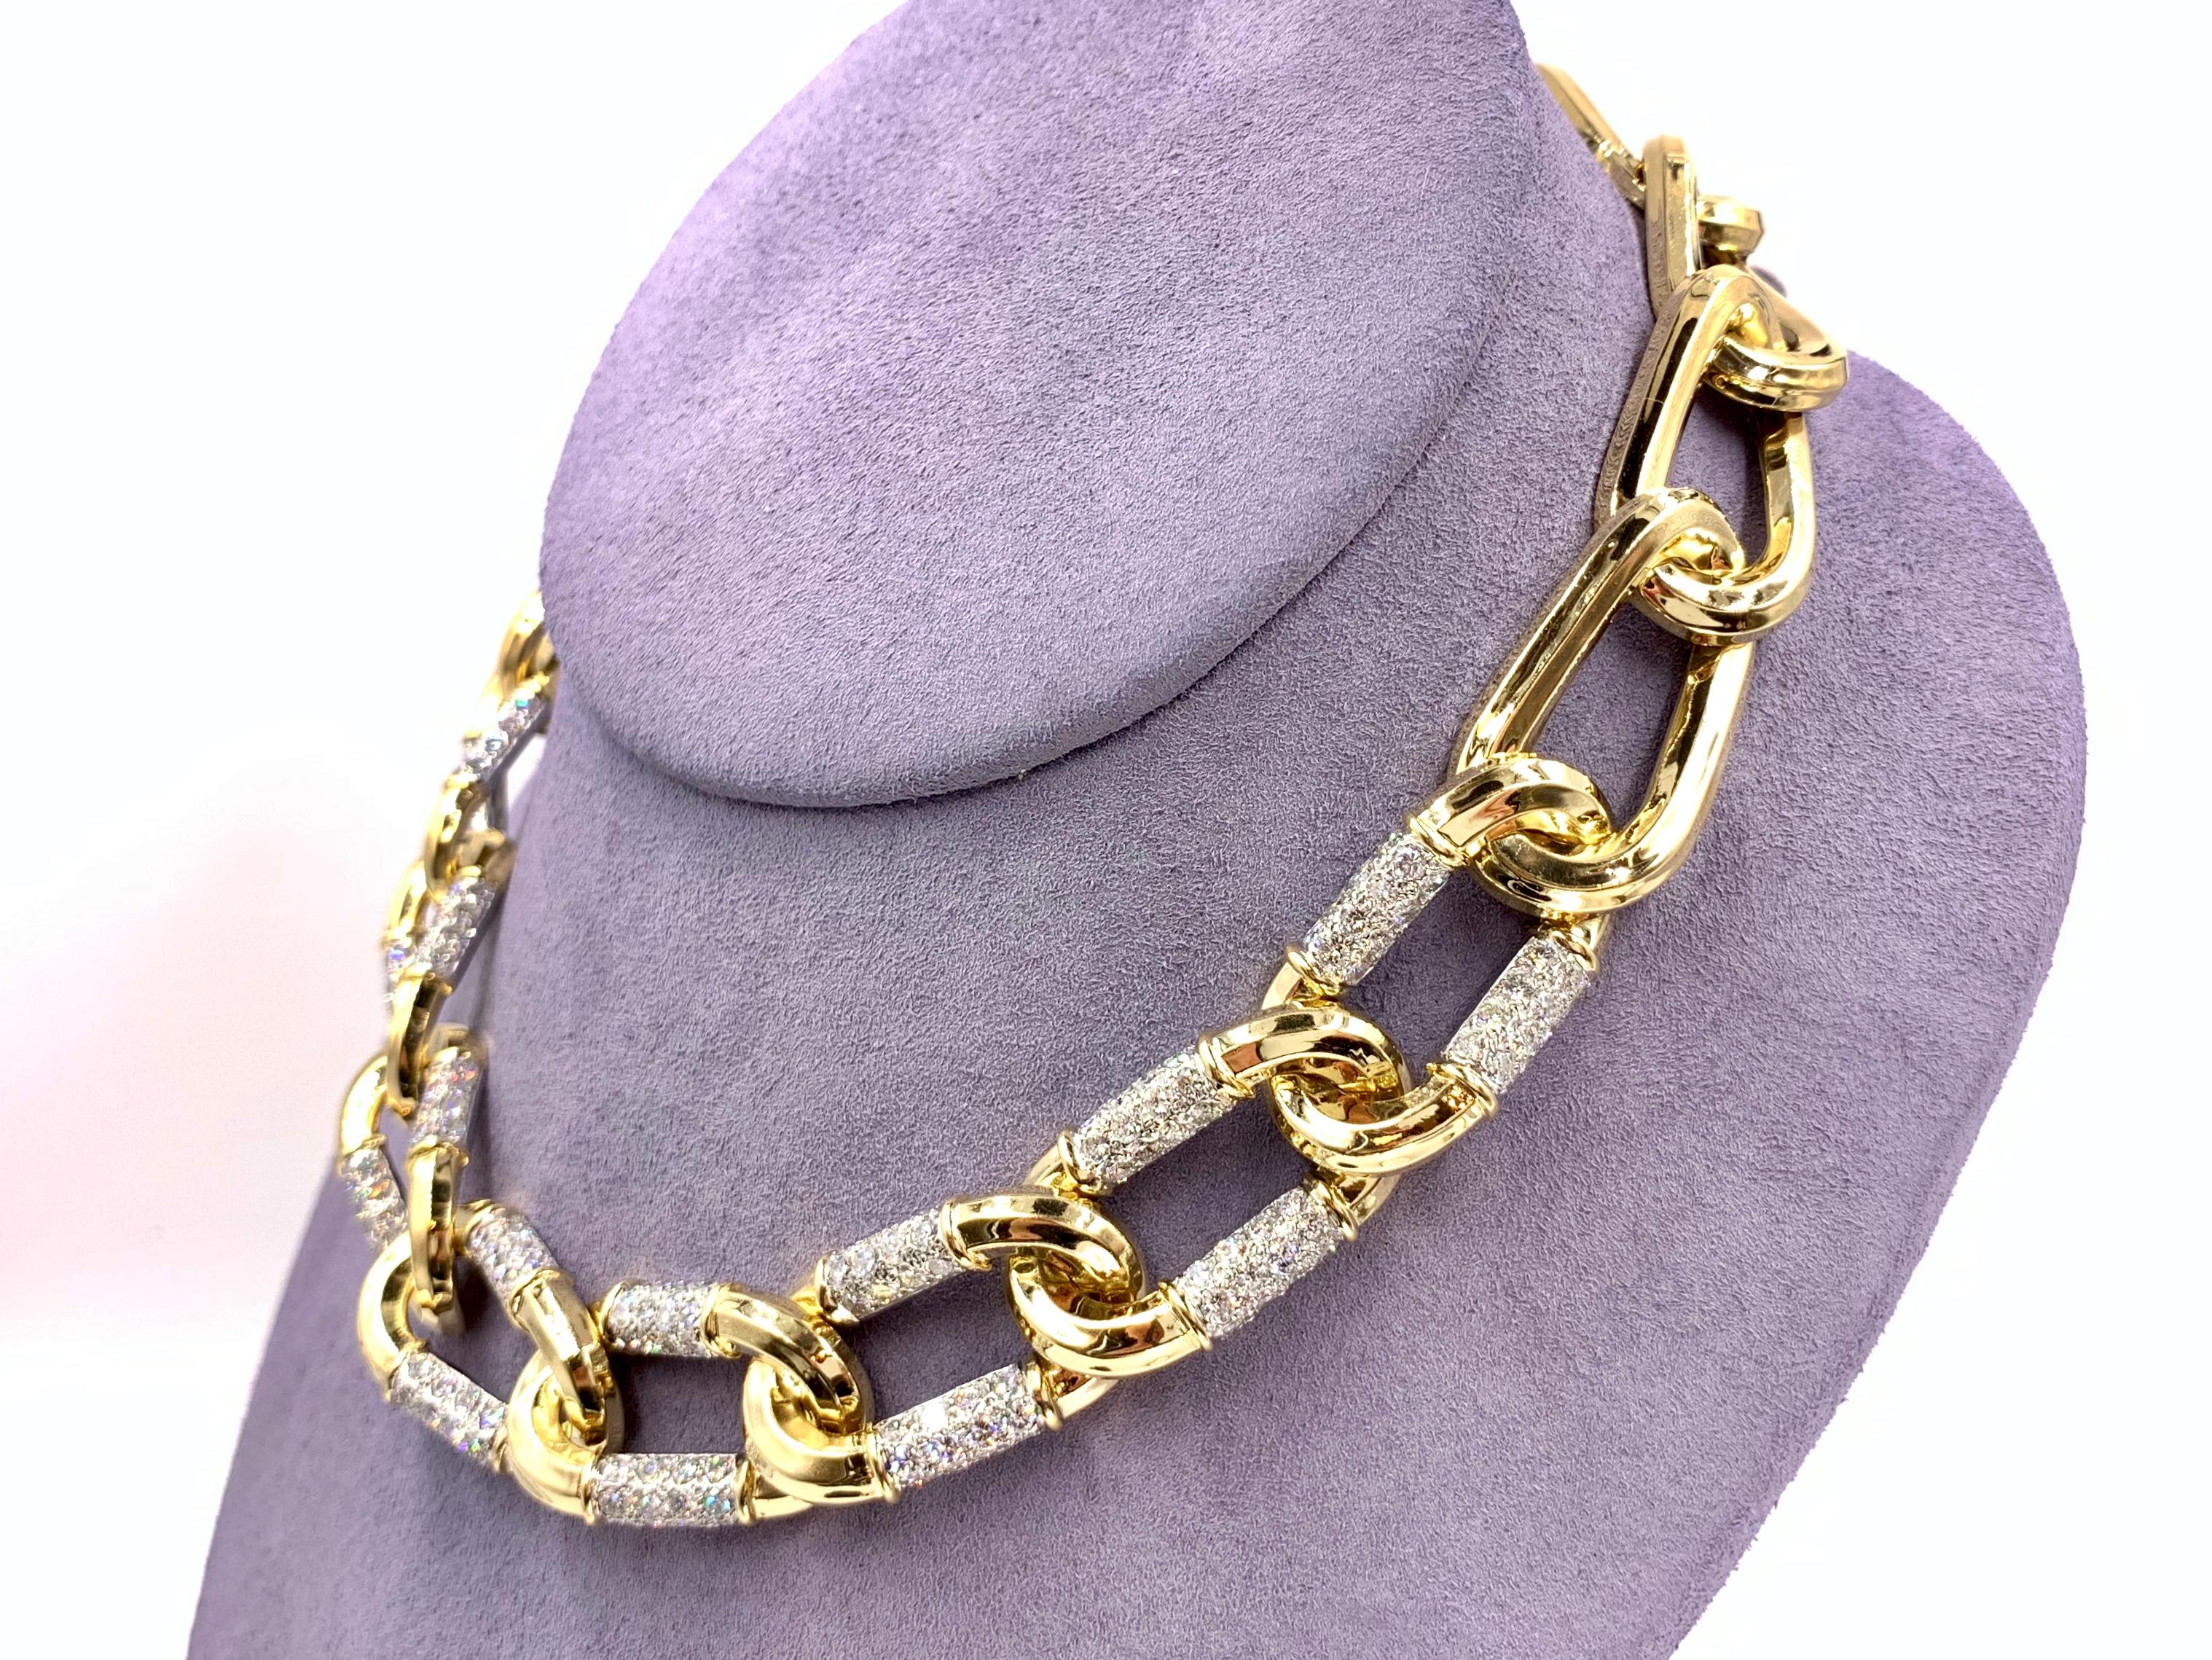 18 Karat and Platinum Charles Turi Large Oval Link Necklace with Diamonds For Sale 2